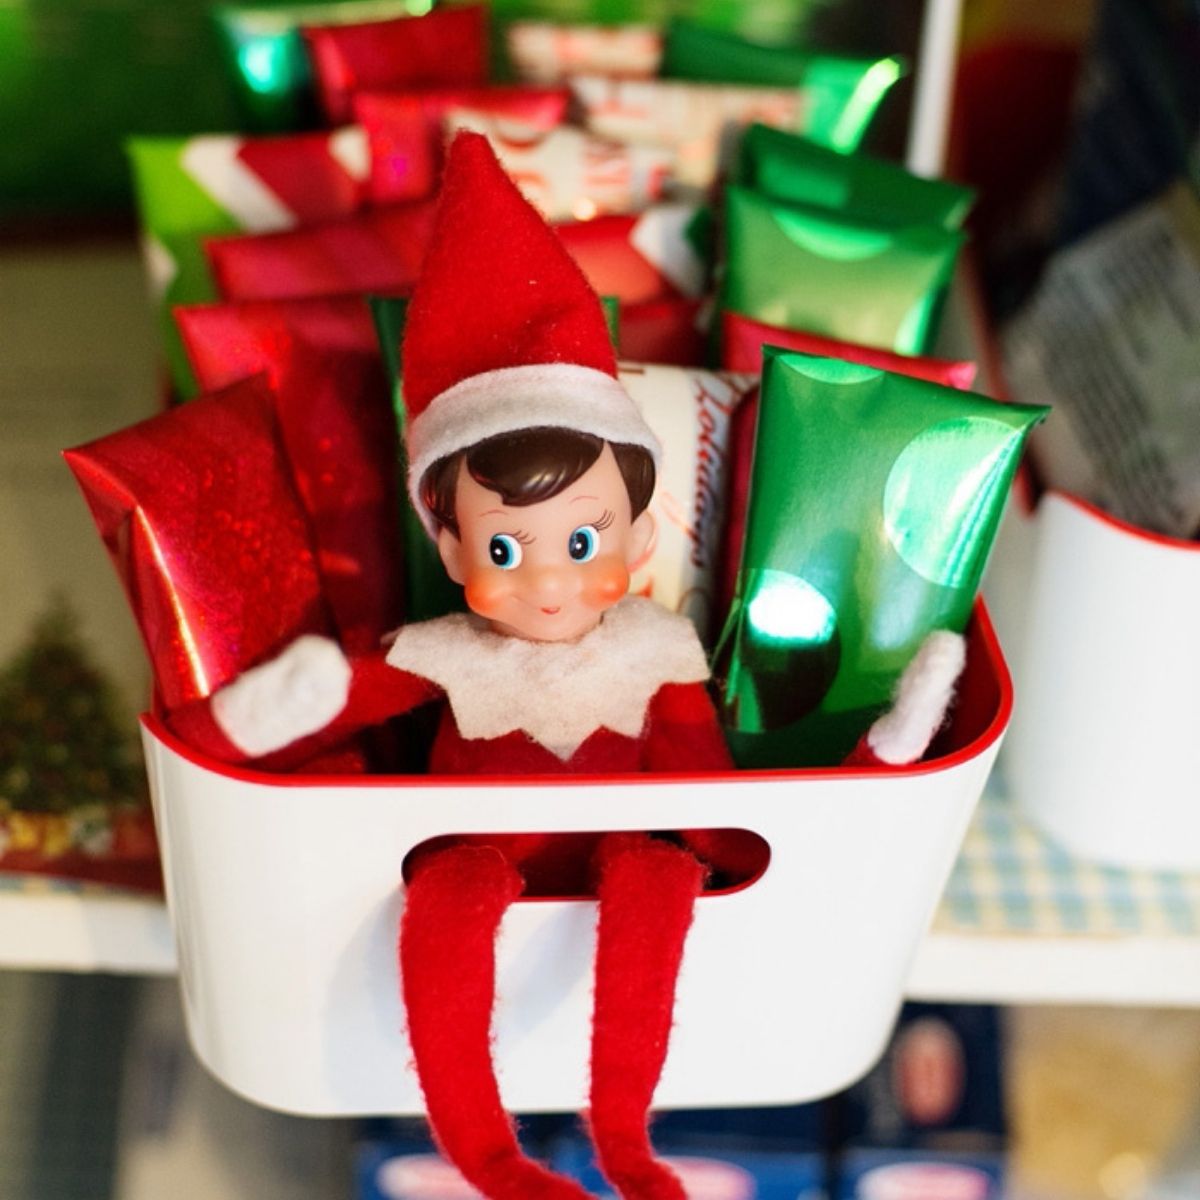 The Elf on the Shelf has gift wrapped the family's granola bars.